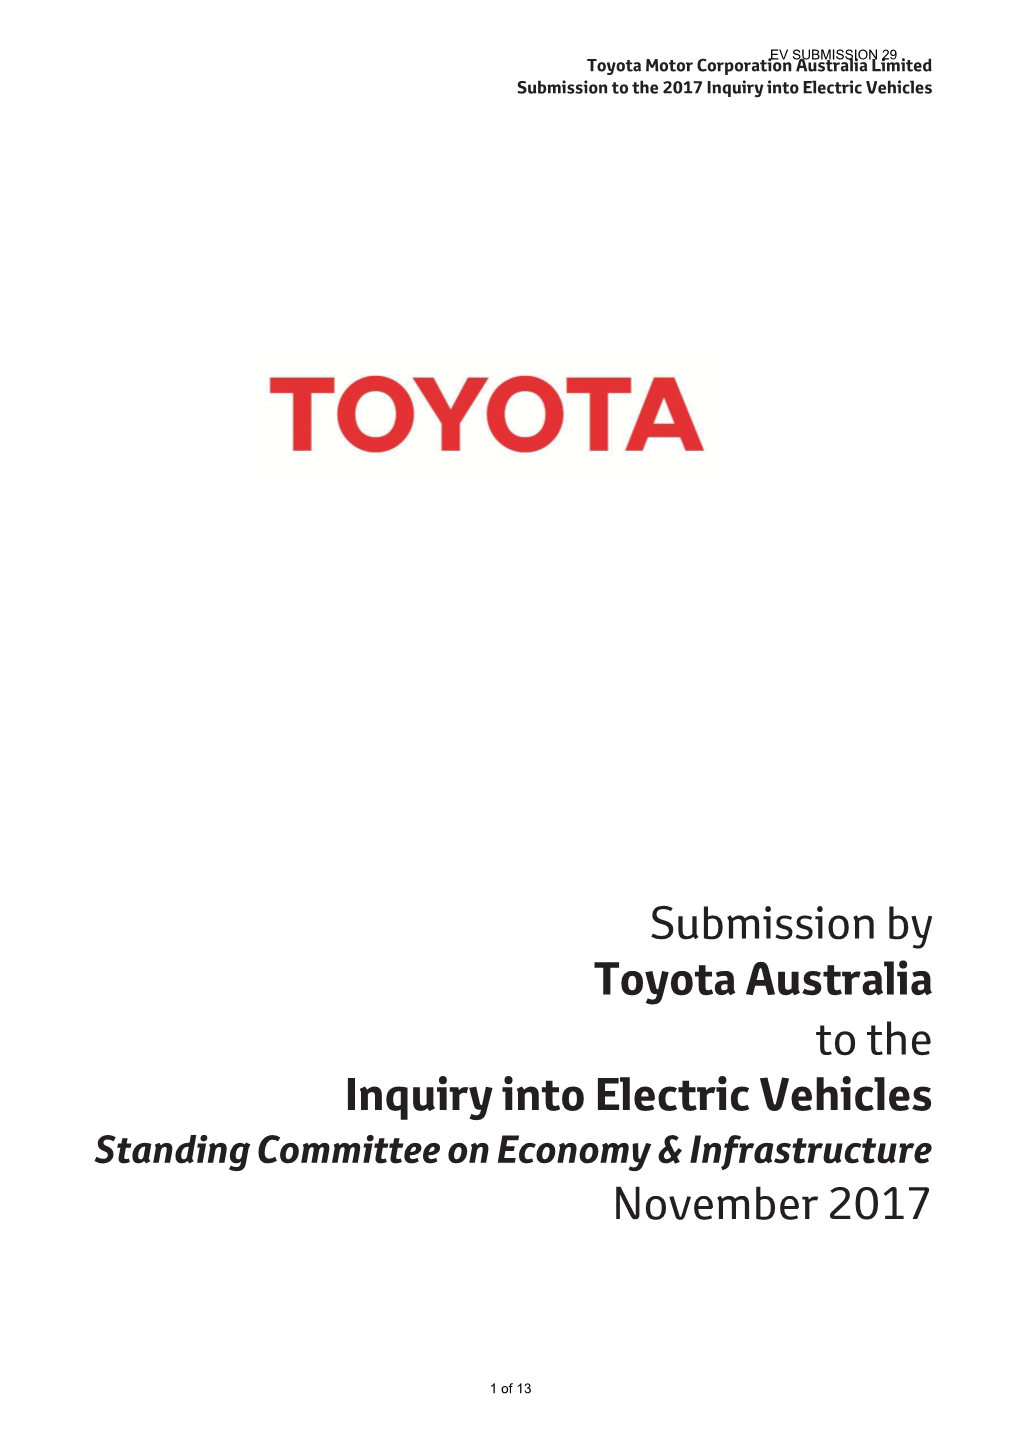 Submission by Toyota Australia to the Inquiry Into Electric Vehicles Standing Committee on Economy & Infrastructure November 2017